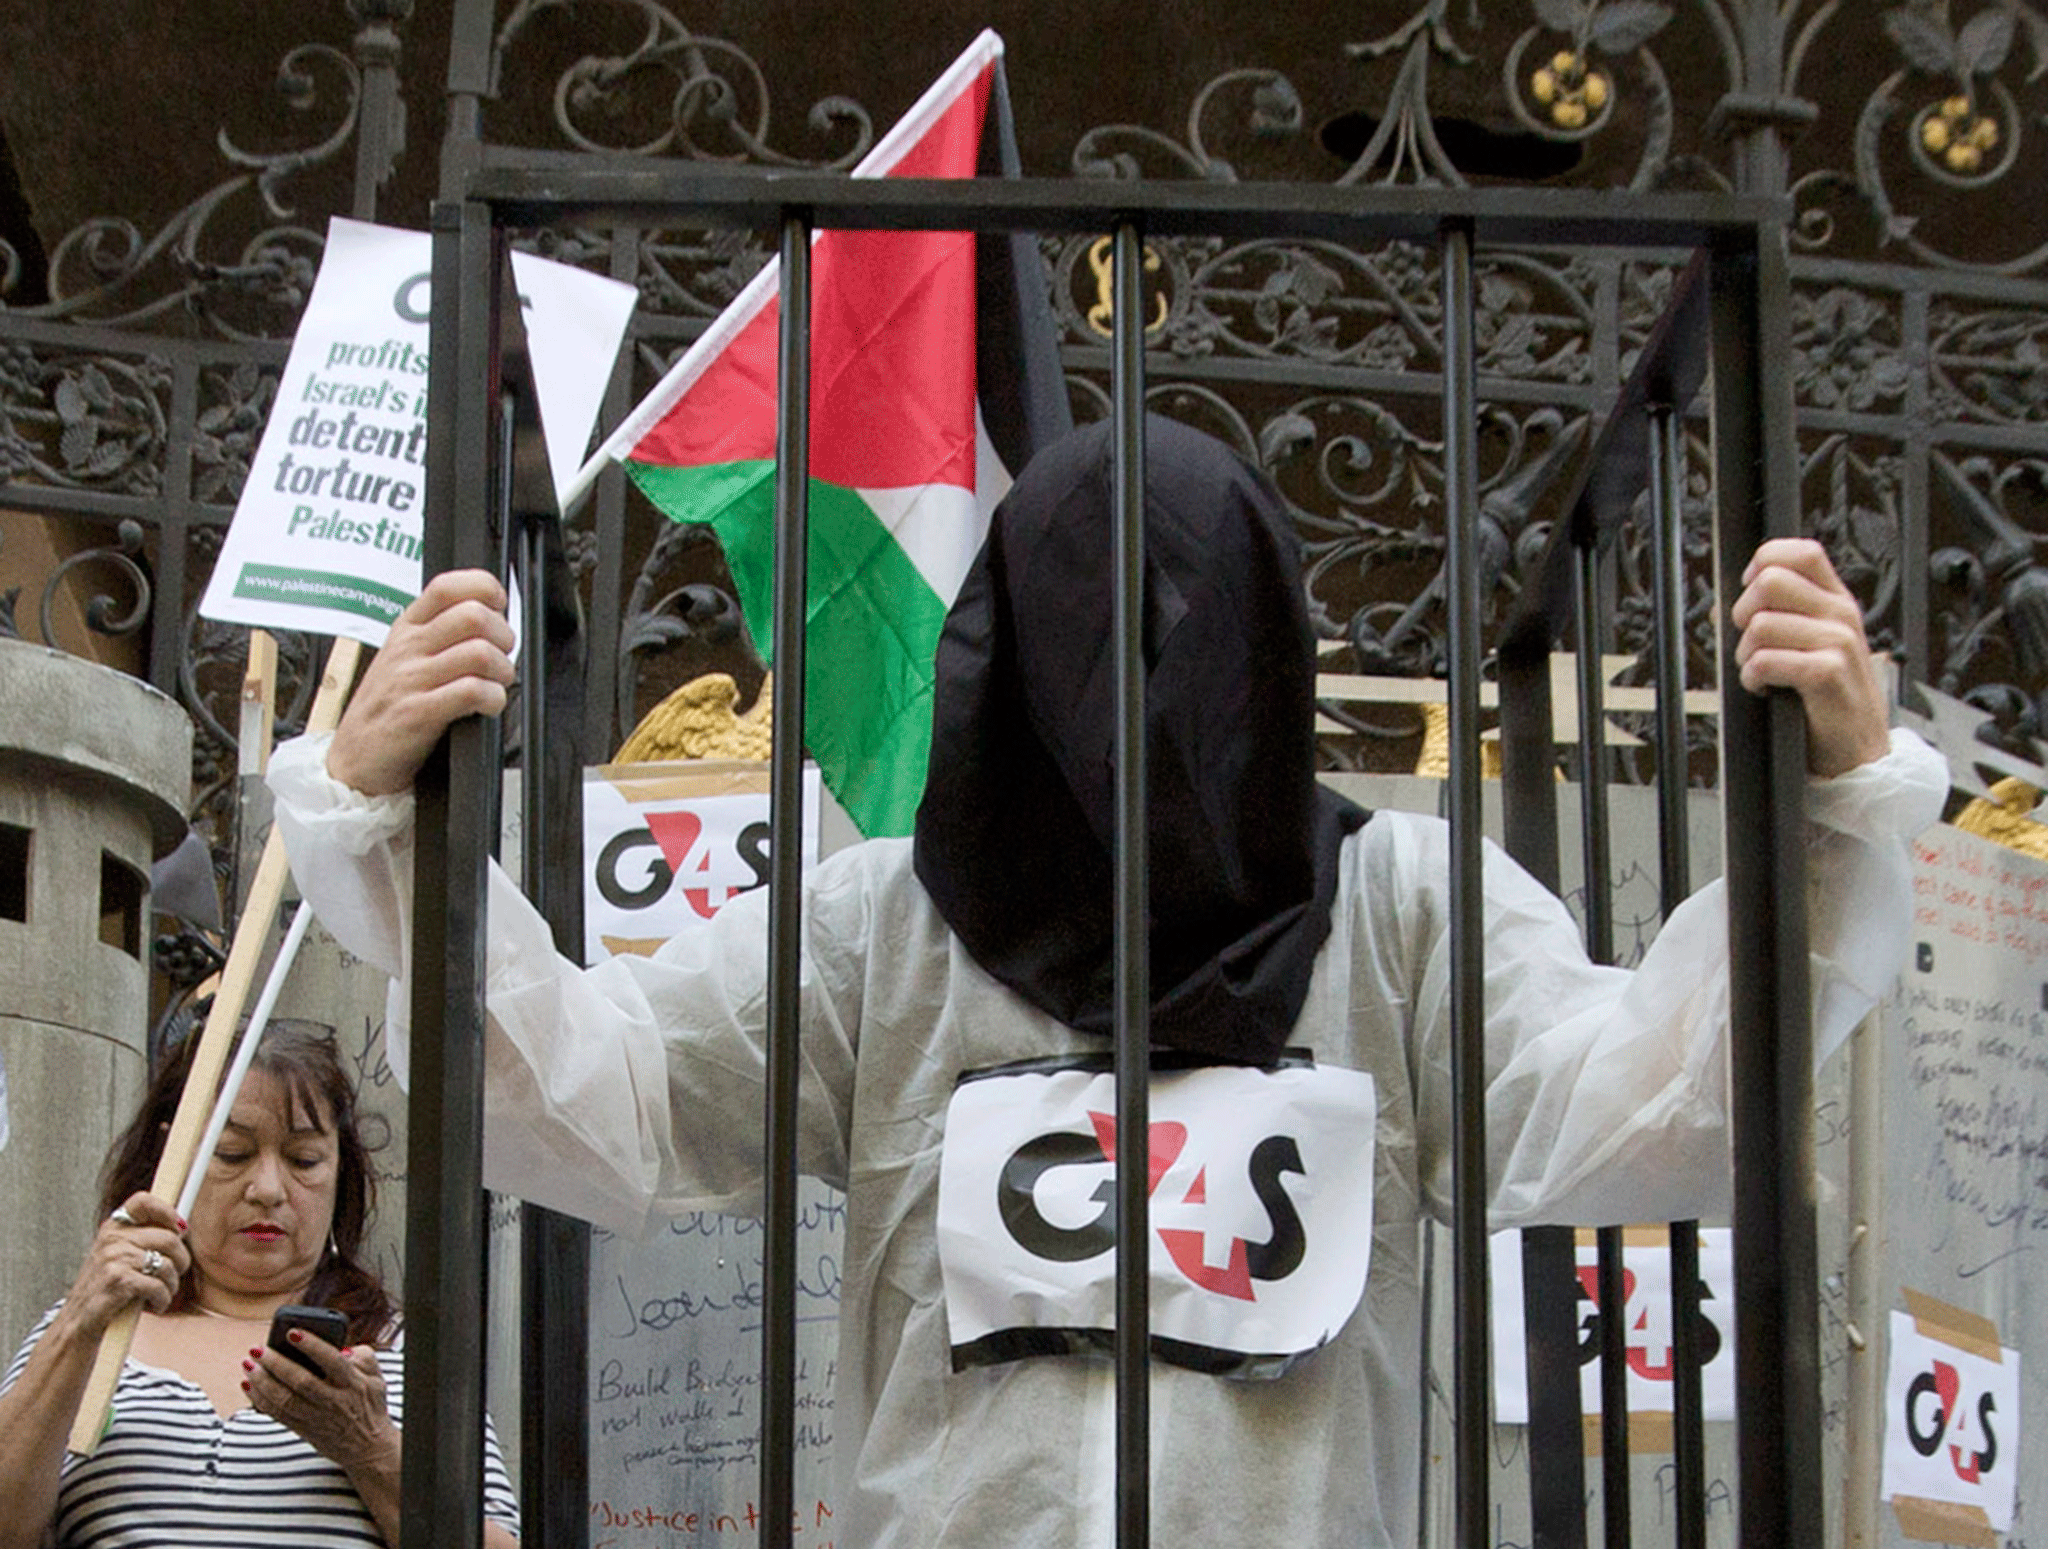 Human rights protesters at G4S' annual general meeting - the company denies campaigns influenced its decision